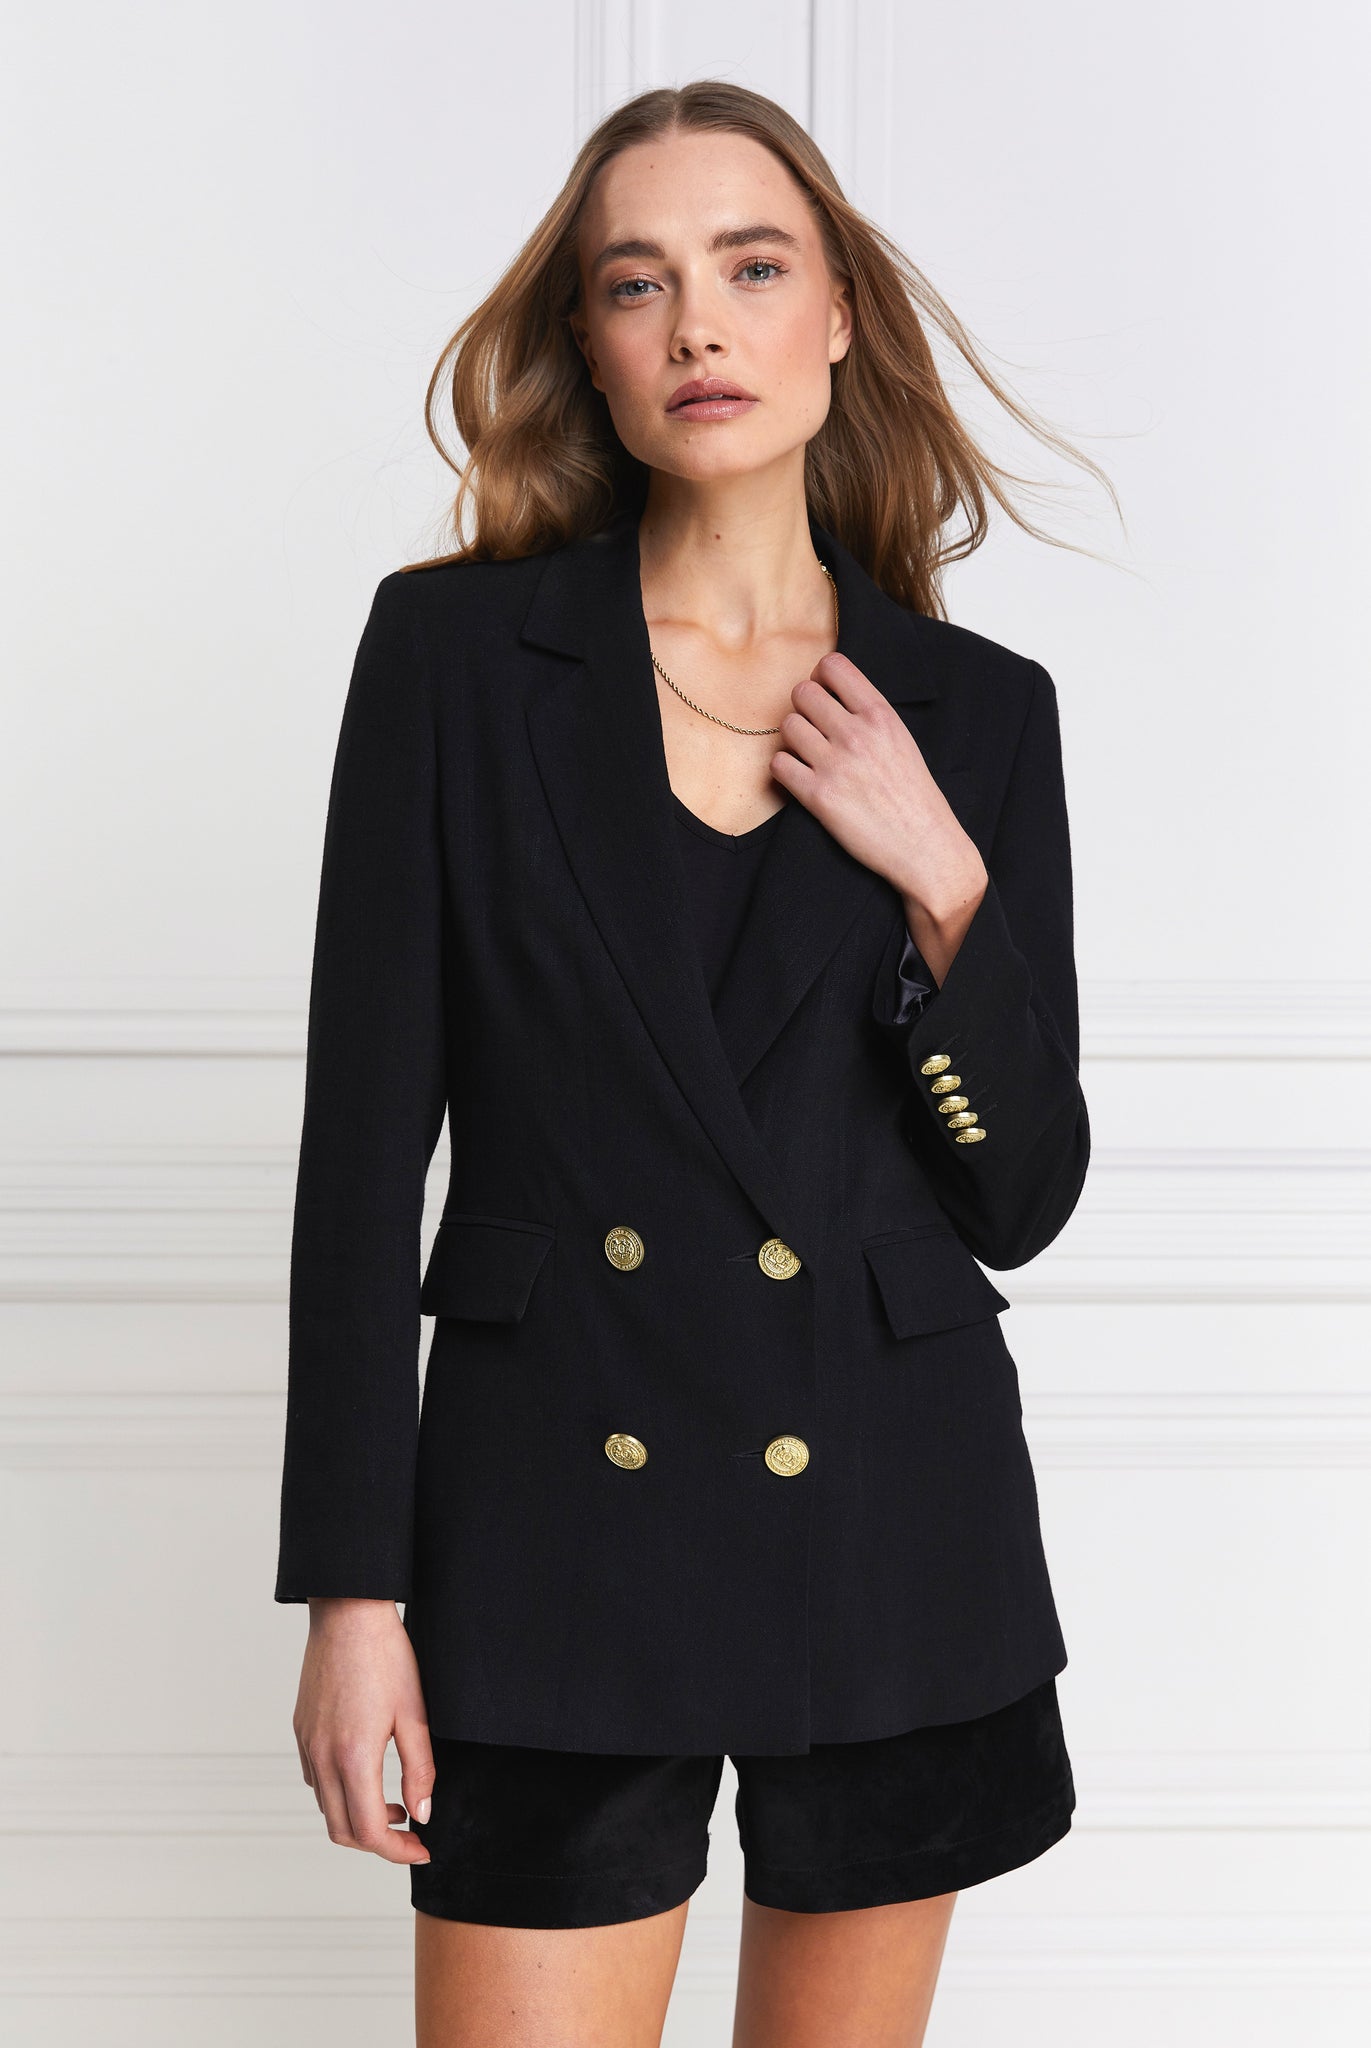 double breasted linen blazer in black with two hip pockets and gold button details down front and on cuffs and handmade in the uk